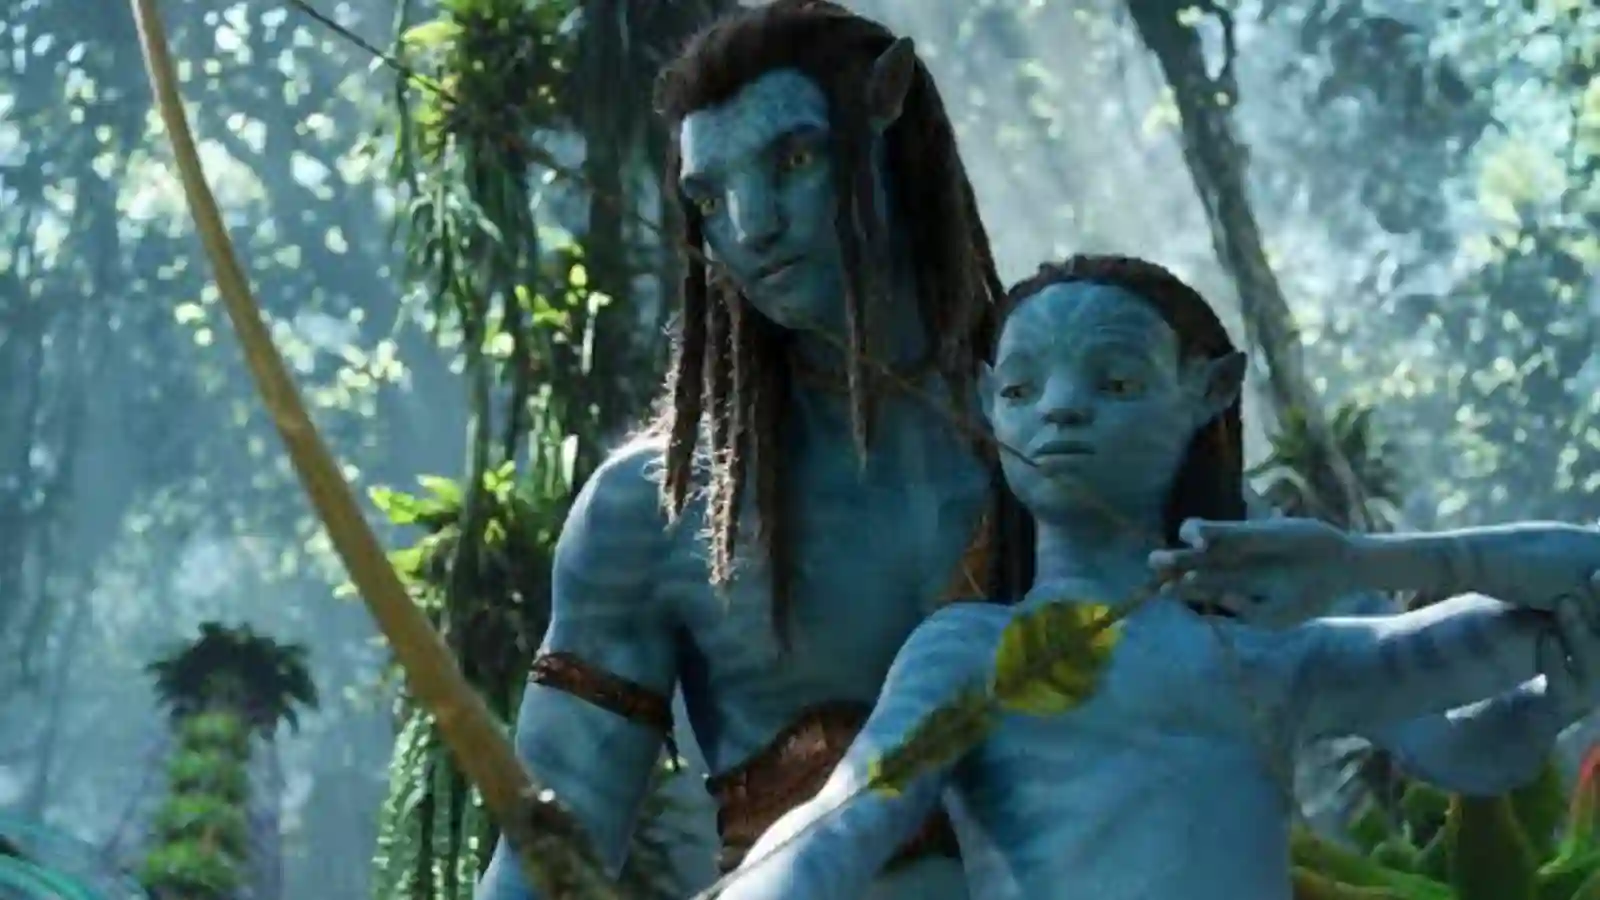 A glimpse from 'Avatar: The Way of Water'